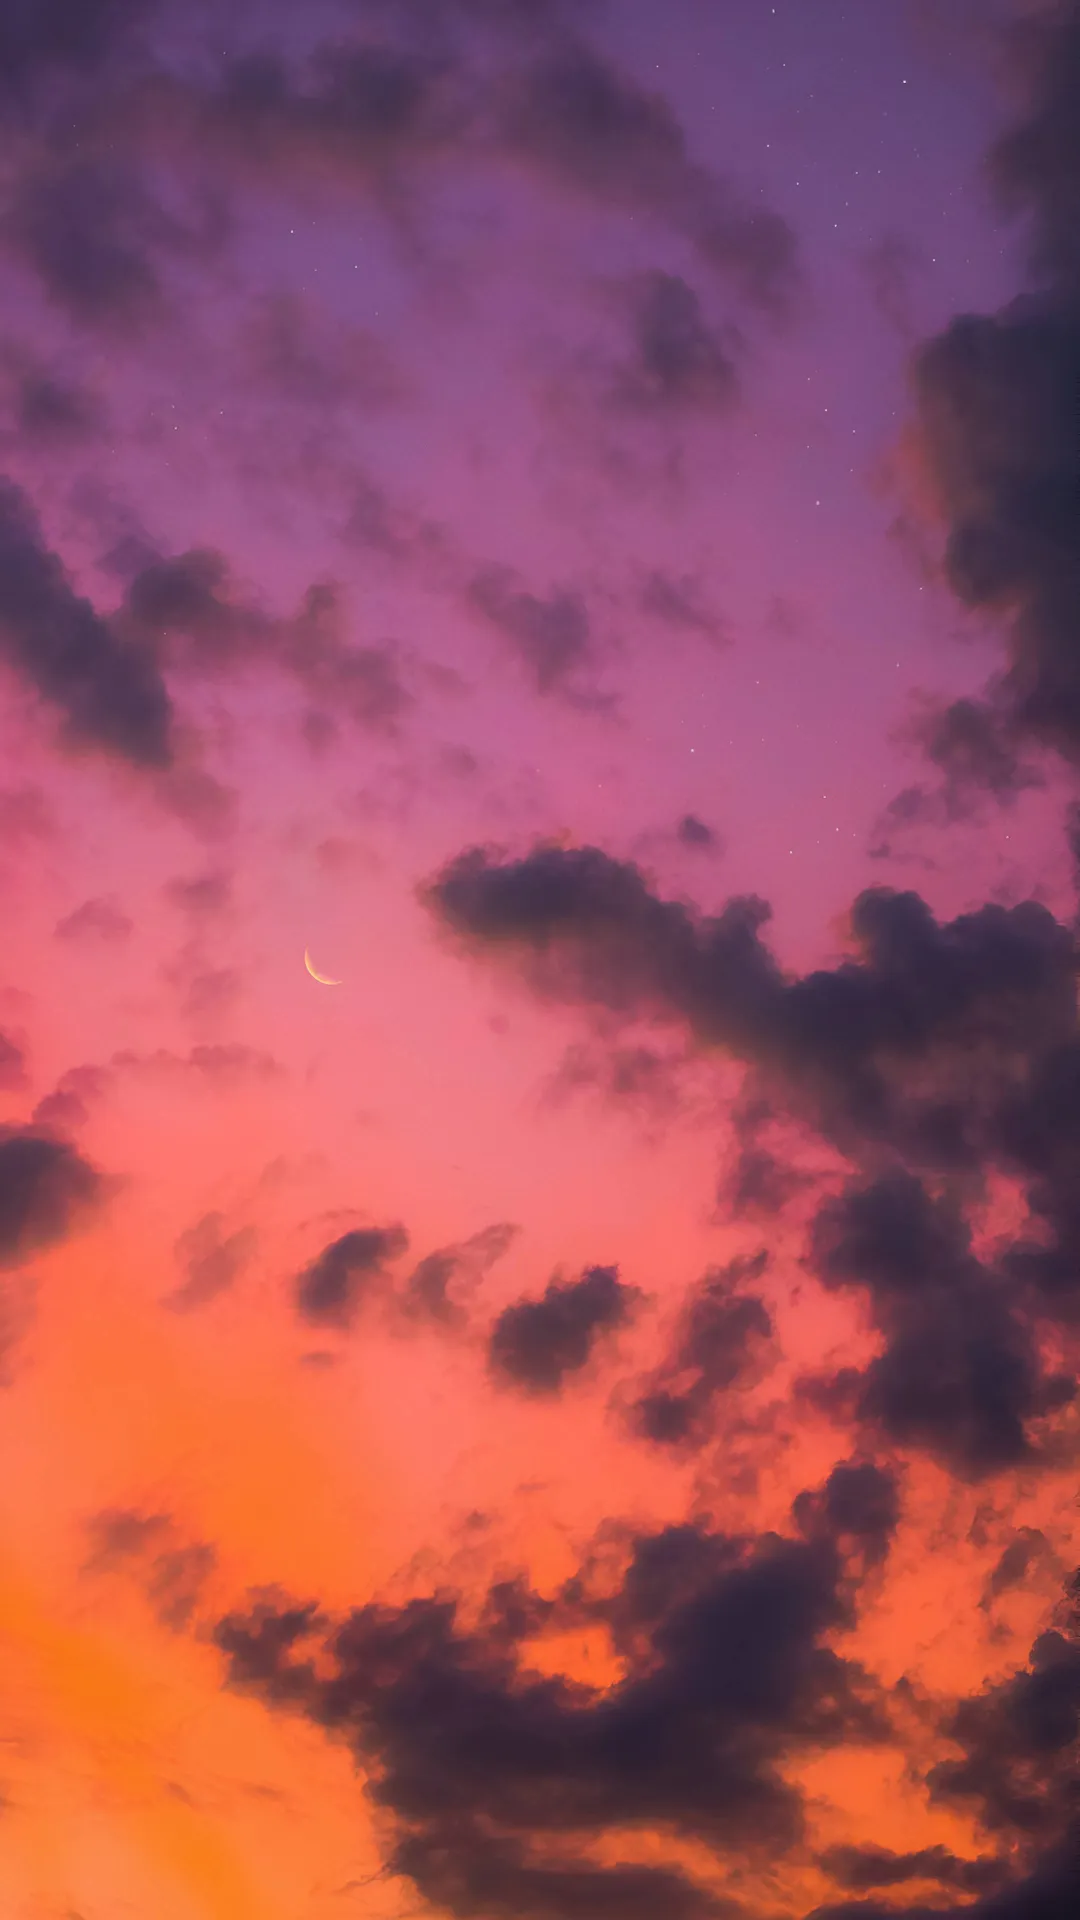 thumb for Aesthetic Clouds Wallpaper